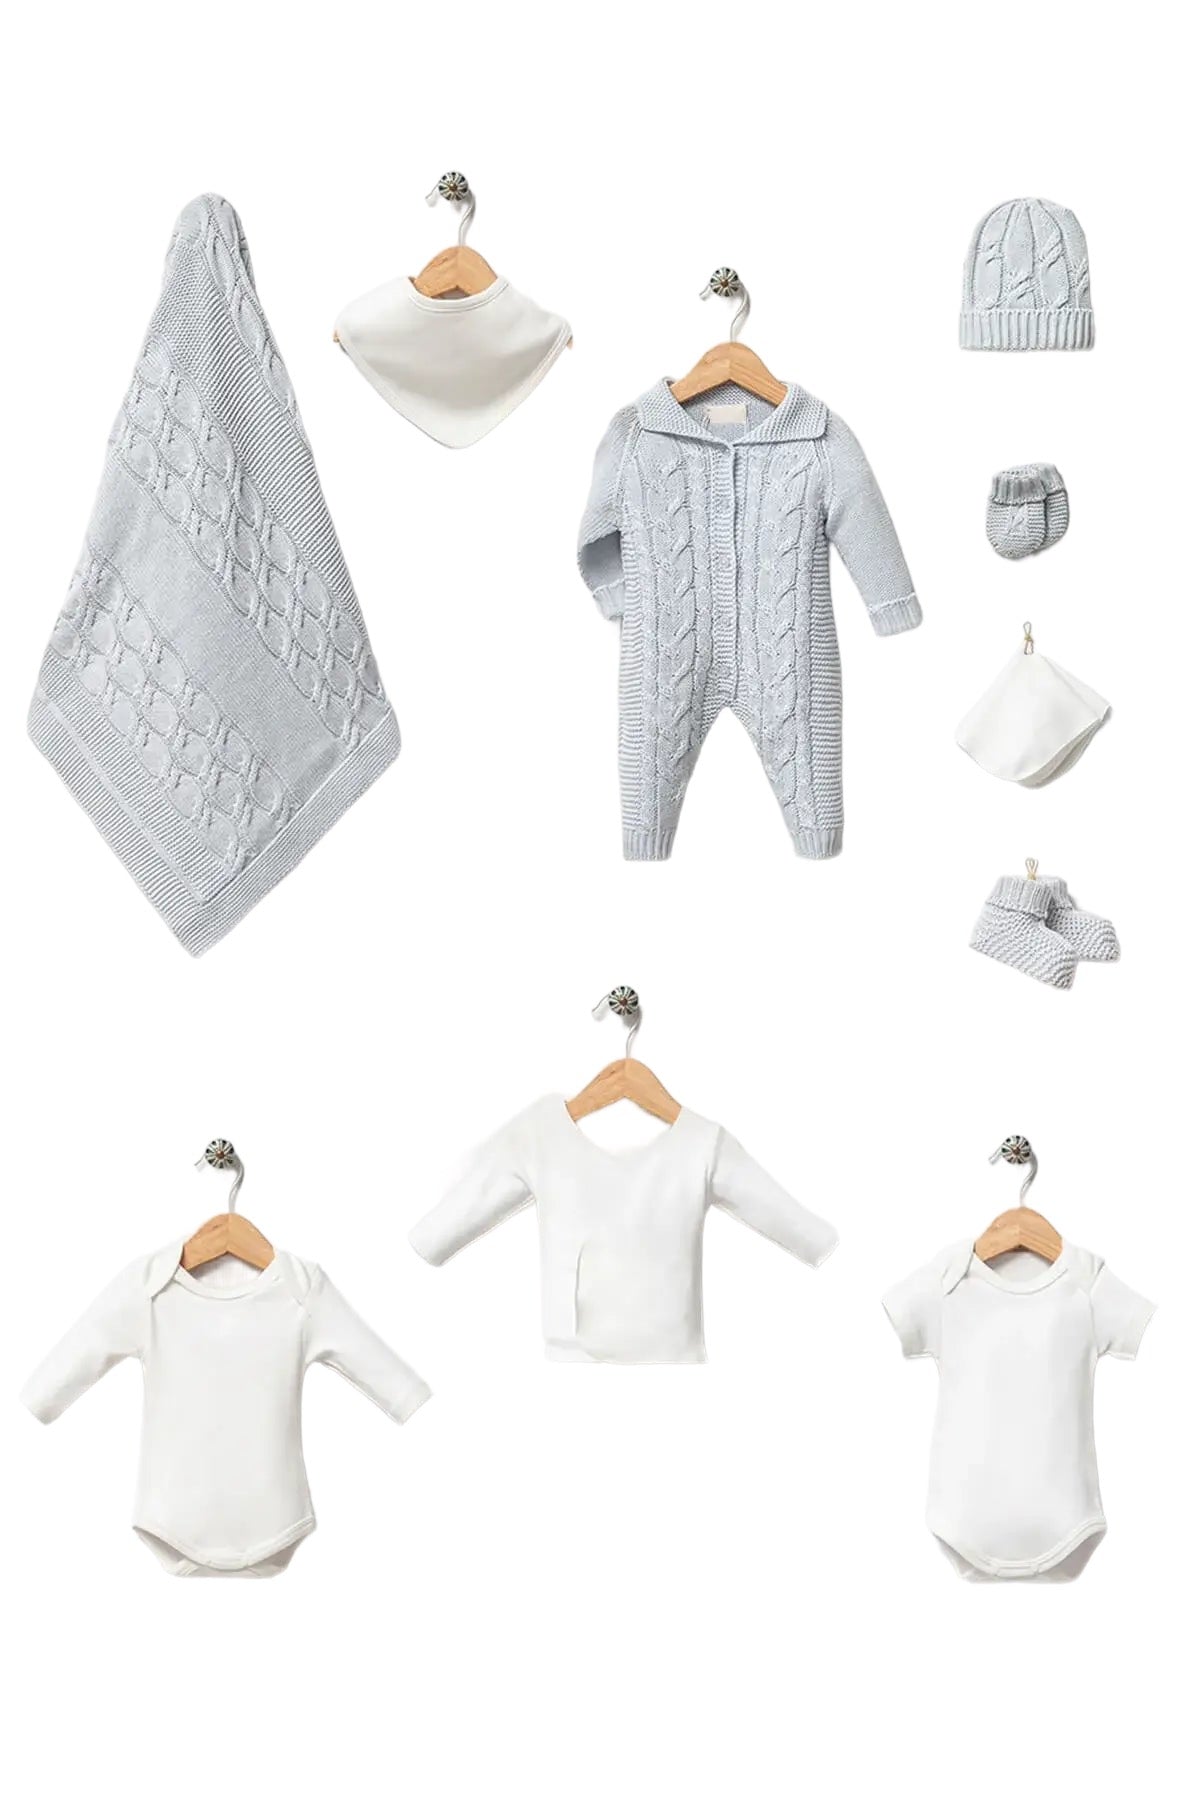 Axel Blue Newborn Boy Coming Home Outfit (10 Pcs)